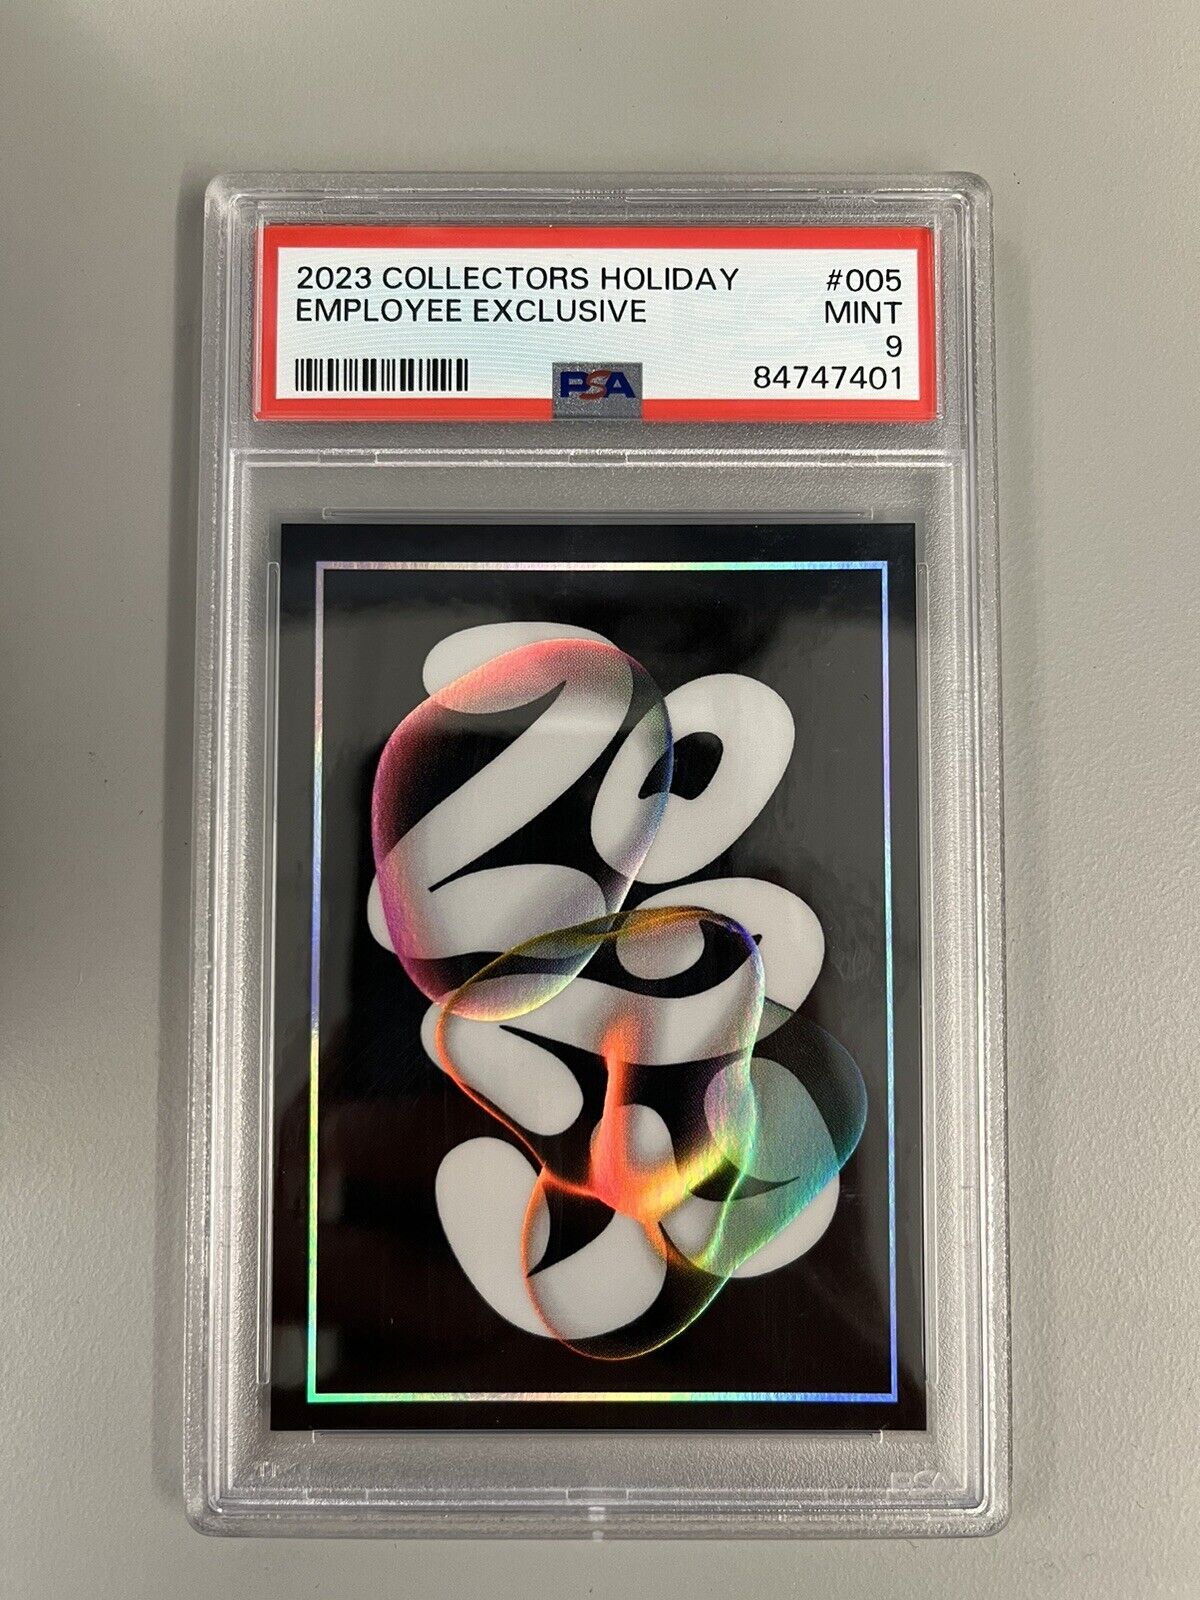 2023 Collectors Holiday Employee Exclusive- PSA 9 #005